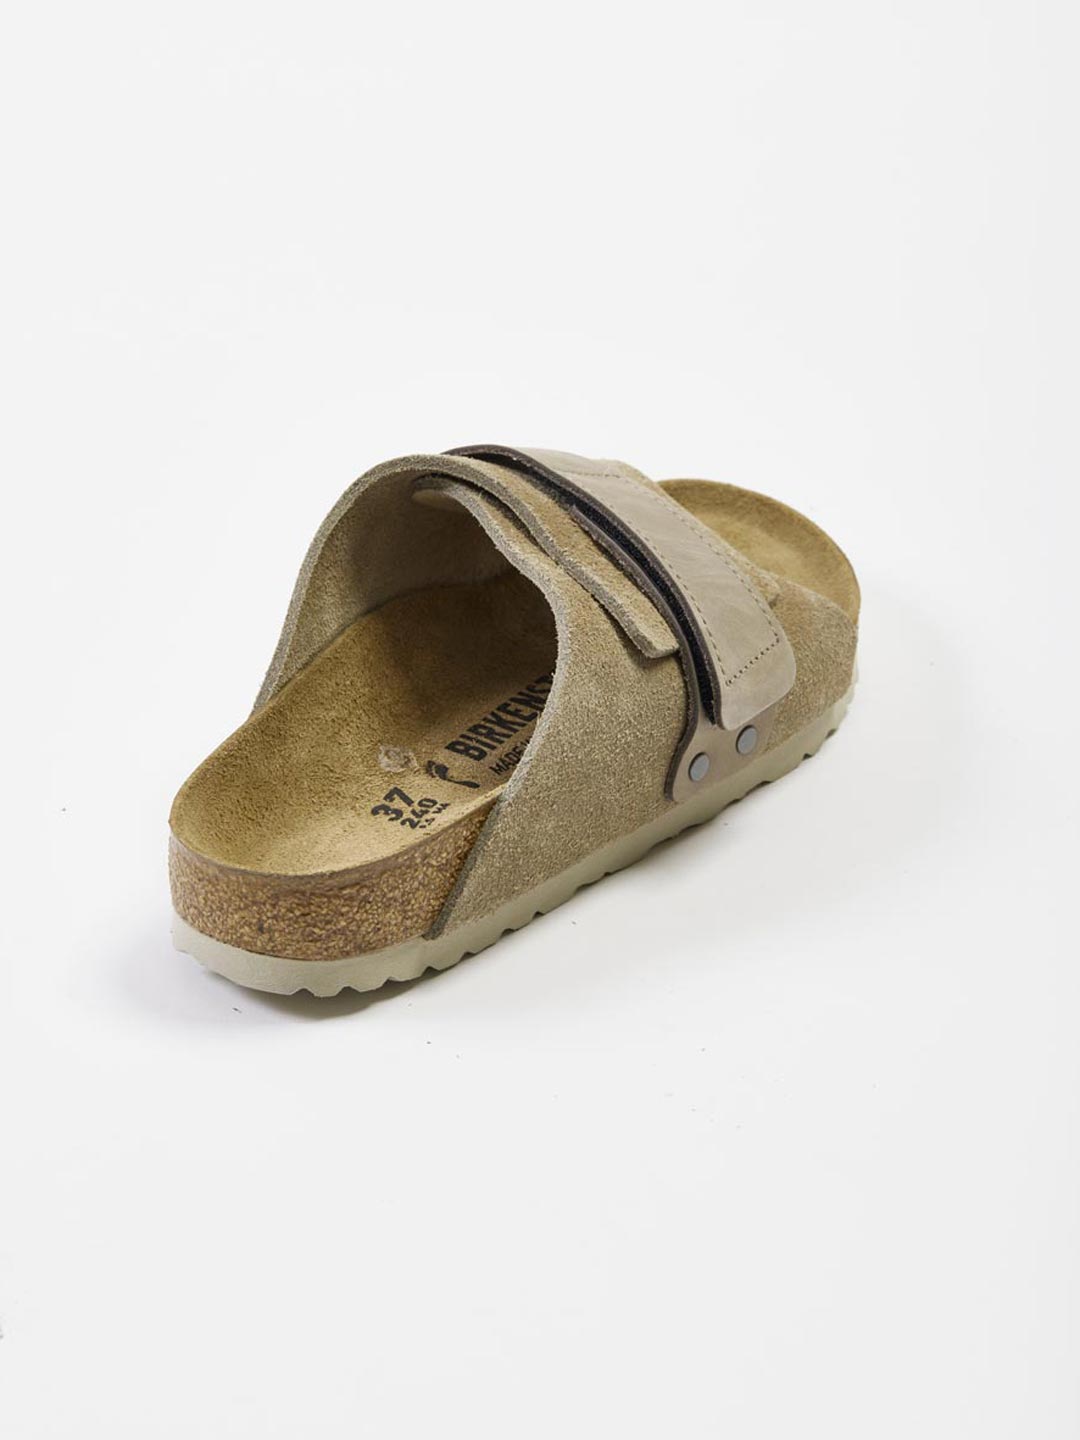 Kyoto VL Sandals - Taupe